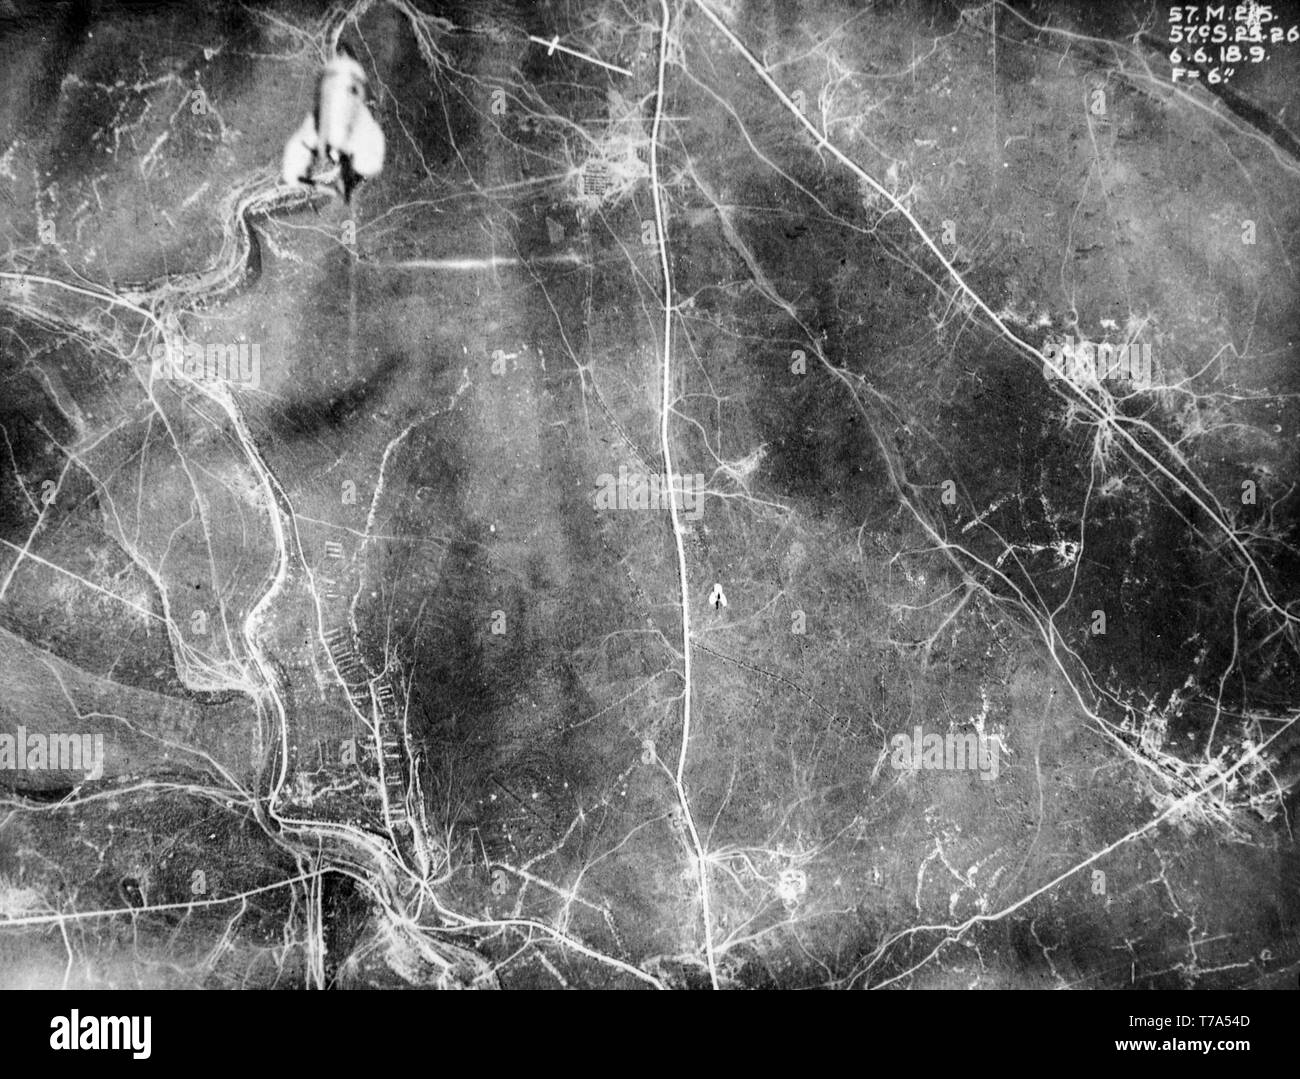 A remarkable black and white aerial British photograph taken on 6th June 1916 during  World War One, clearly showing two bombs being dropped from aeroplanes on to targets over Northern France. Stock Photo